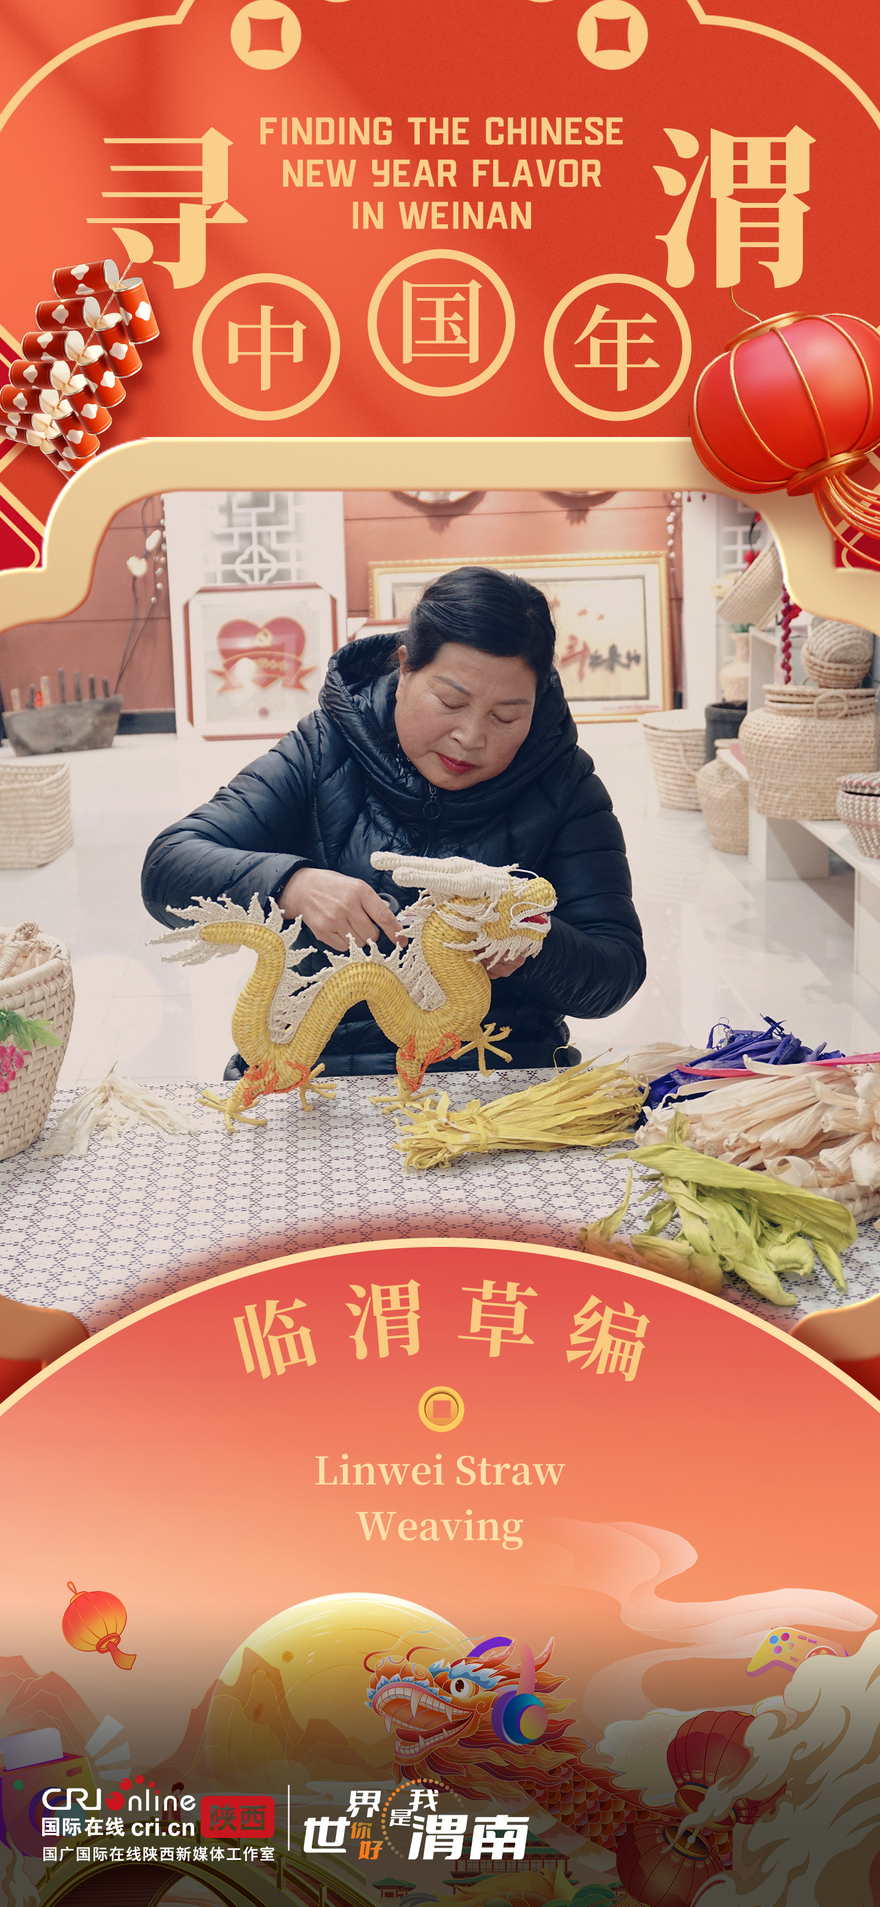 Finding the Chinese New Year Flavor in Weinan_fororder_微信图片_20240209111200